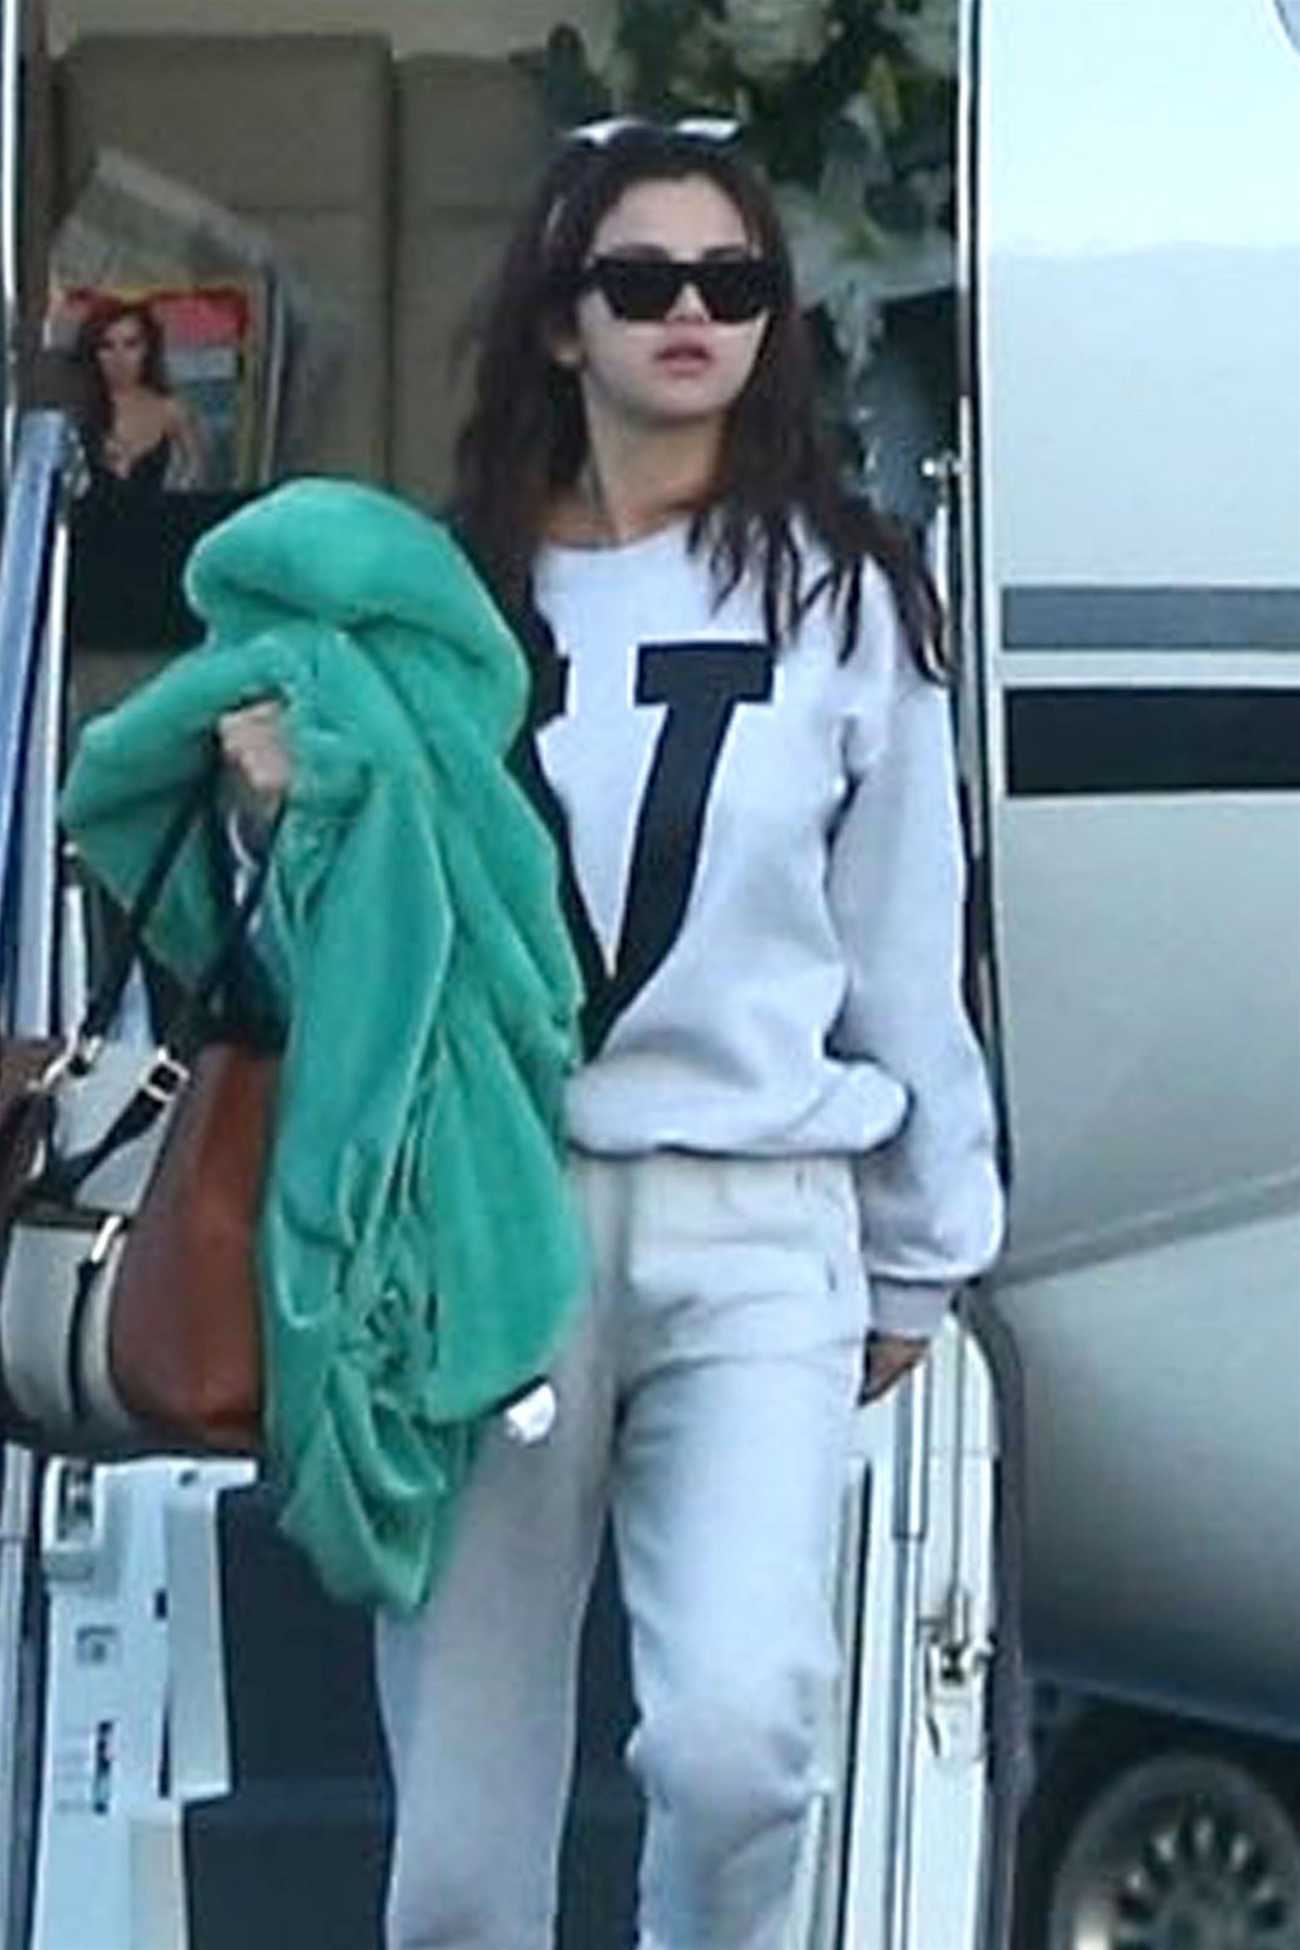 Selena_Gomez_-_Arriving_with_friends_to_a_private_jet_in_Los_Angeles2C_CA_on_February_7-02.jpg